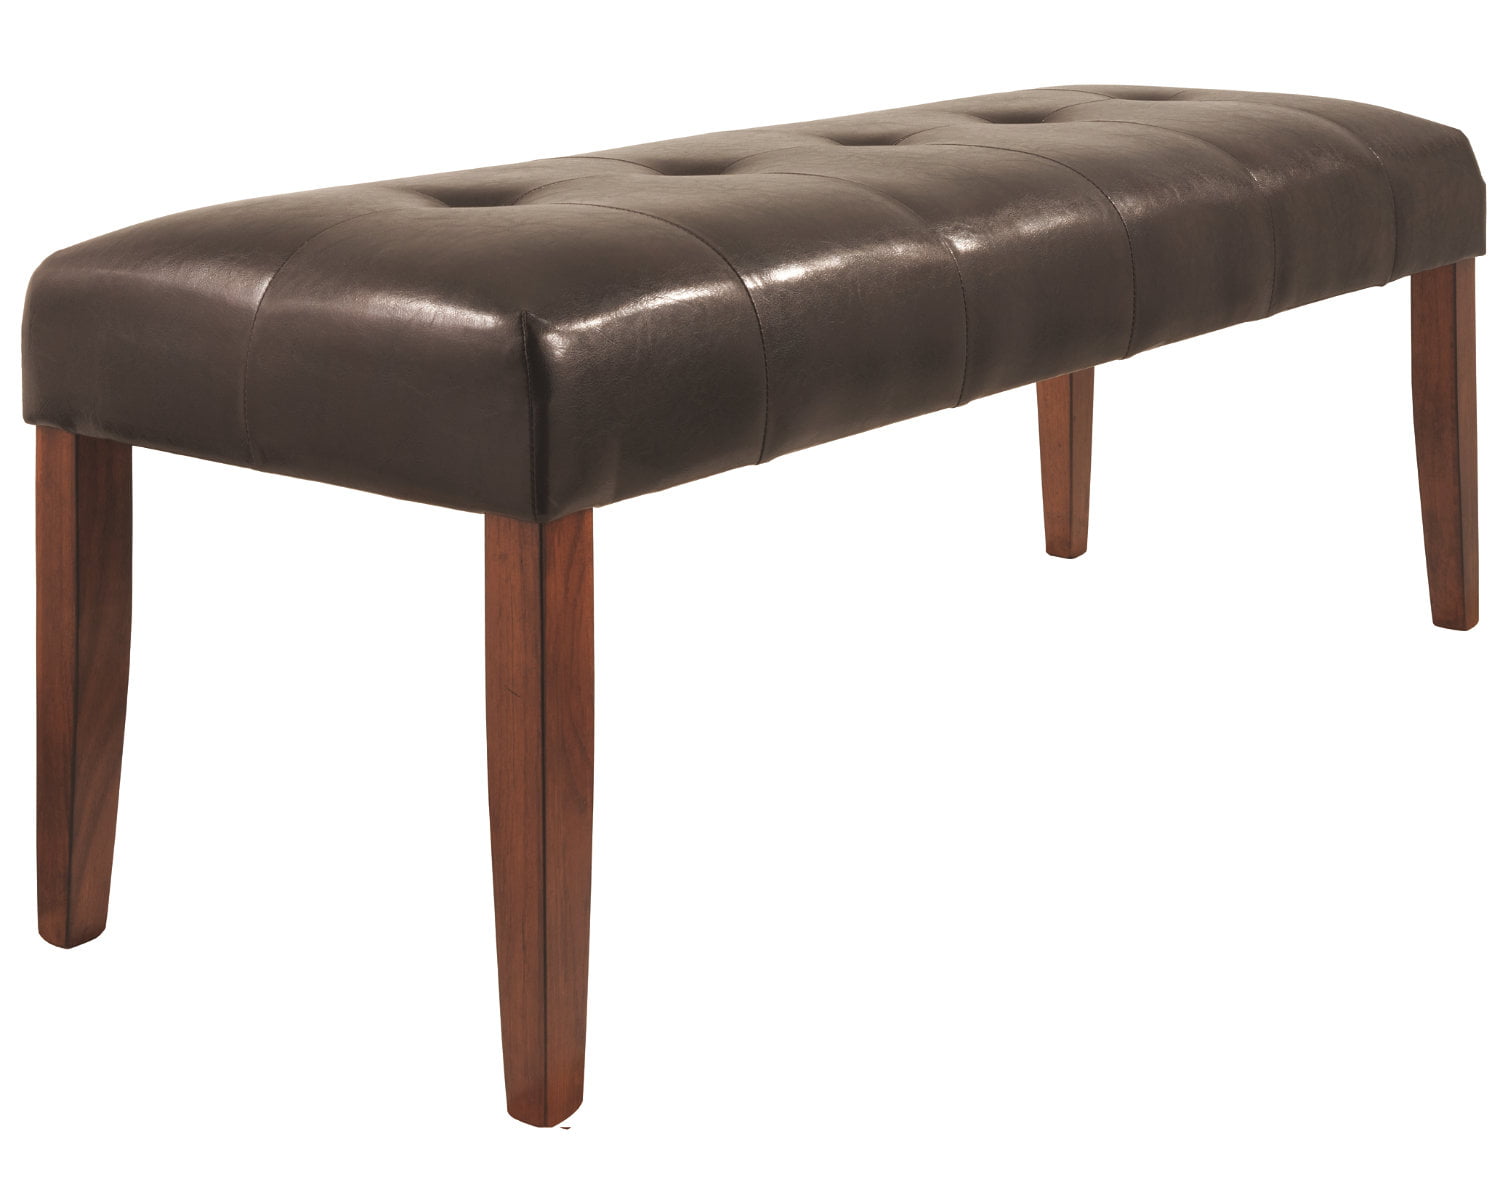 Signature Design By Ashley Lacey Large Upholstered Dining Room Bench Contemporary Style Medium Brown Walmart Com Walmart Com